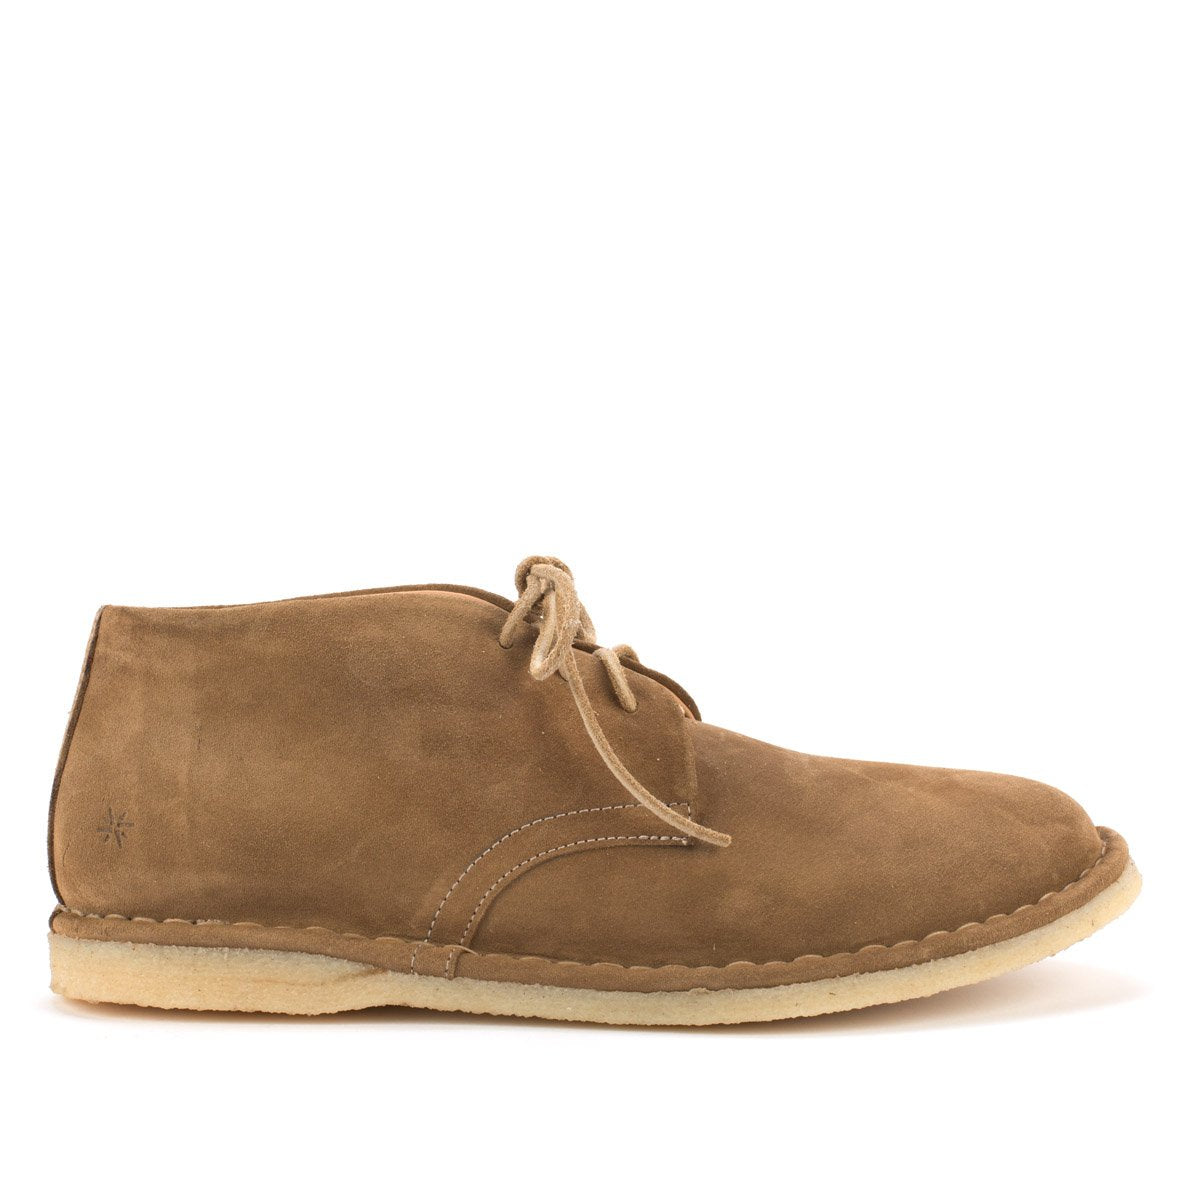 HAND 05 SUEDE – Natural